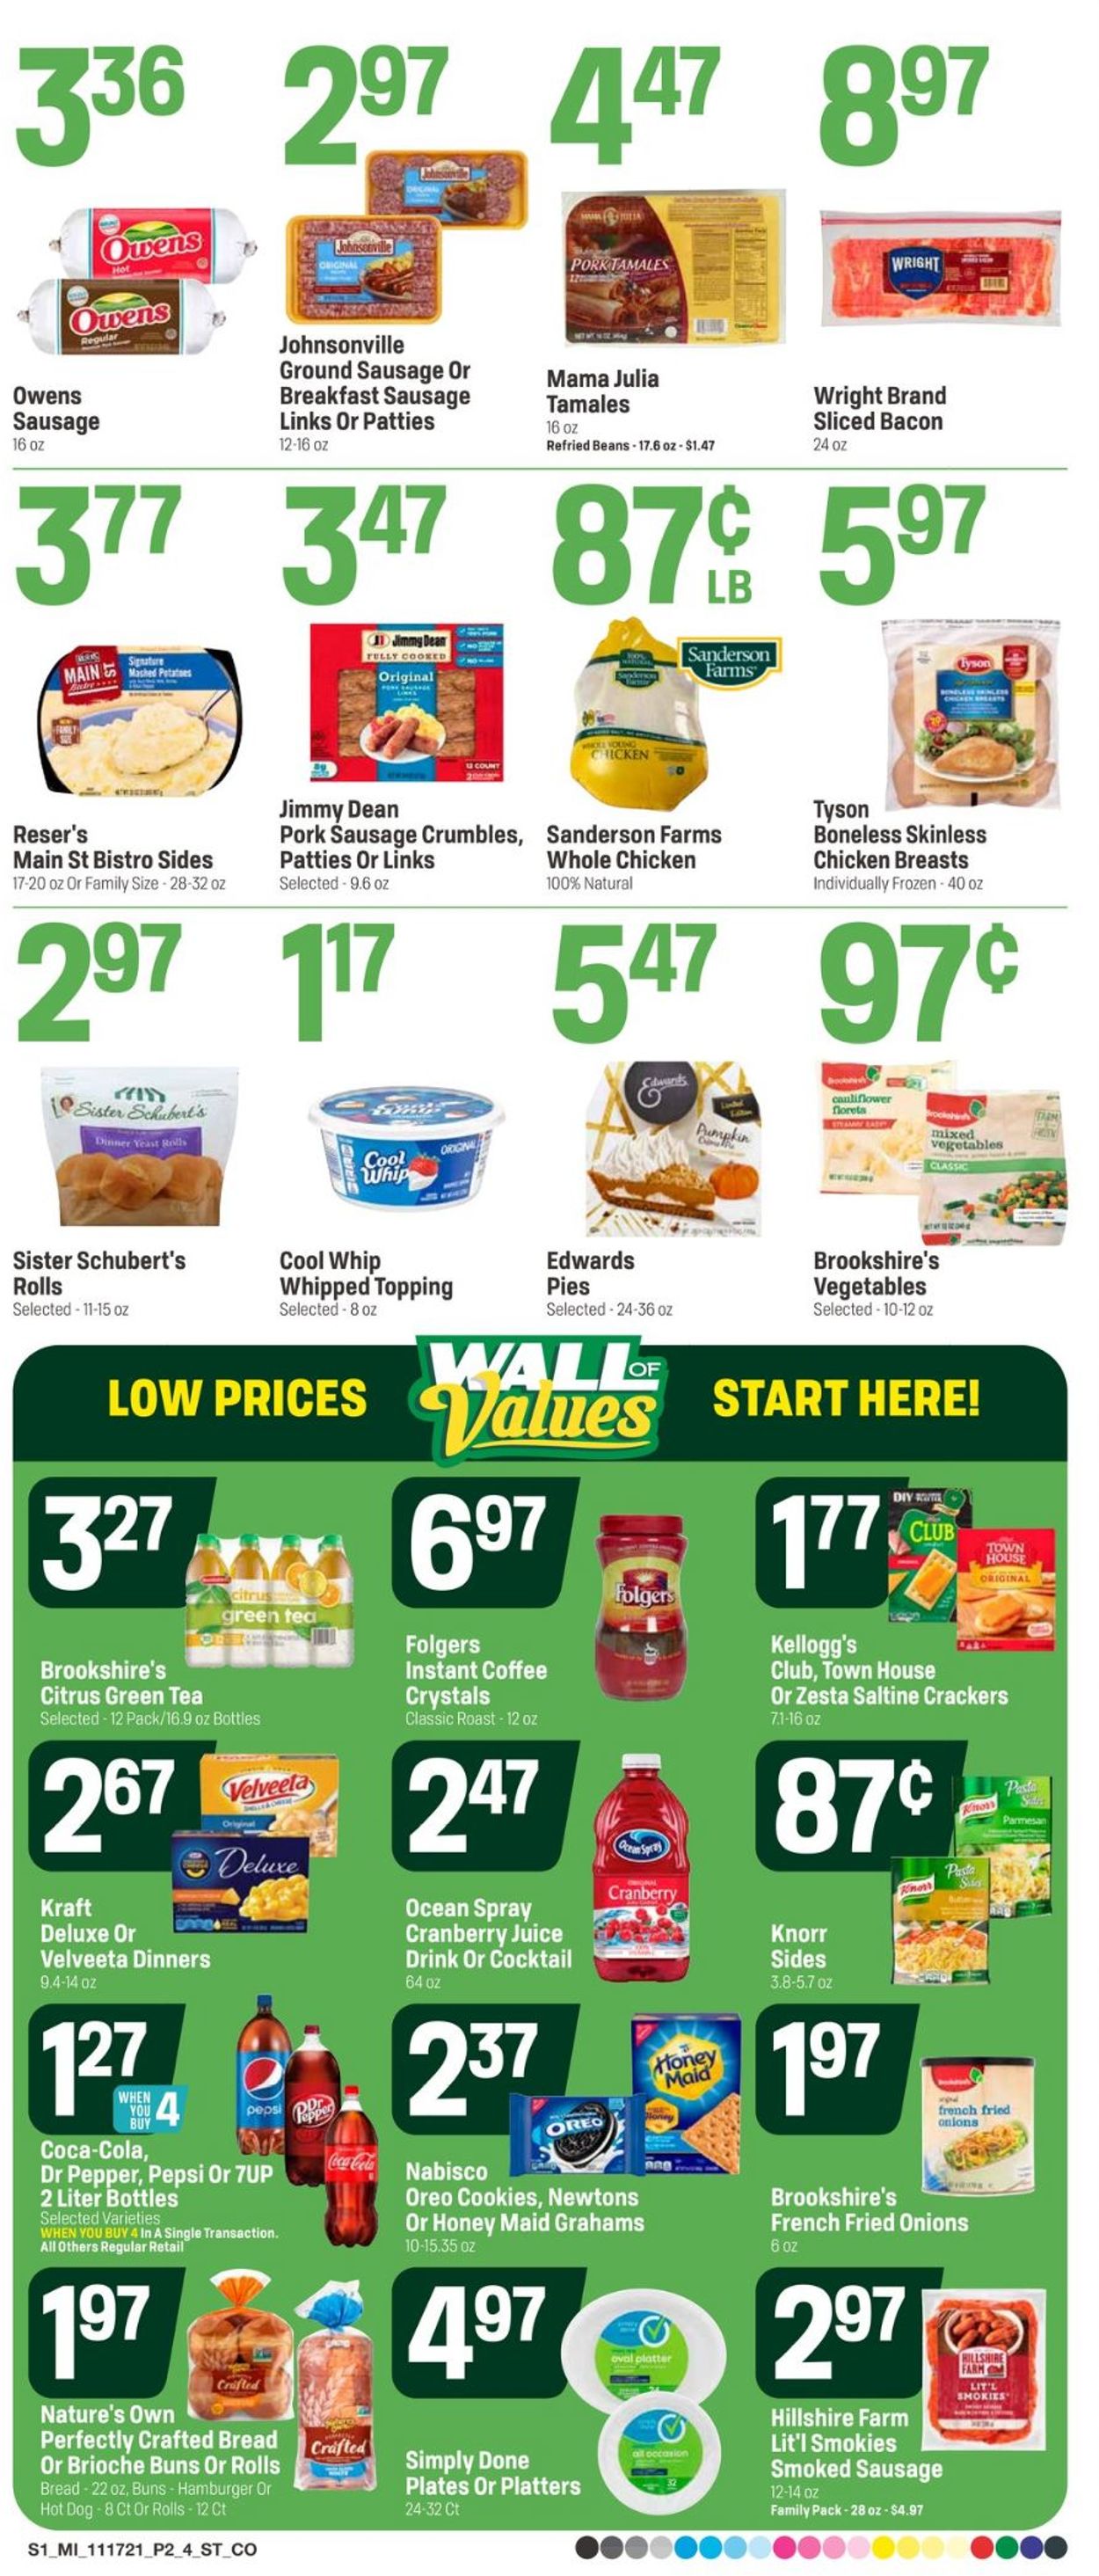 Super 1 Foods THANKSGIVING 2021 Weekly Ad Circular - valid 11/17-11/25/2021 (Page 2)